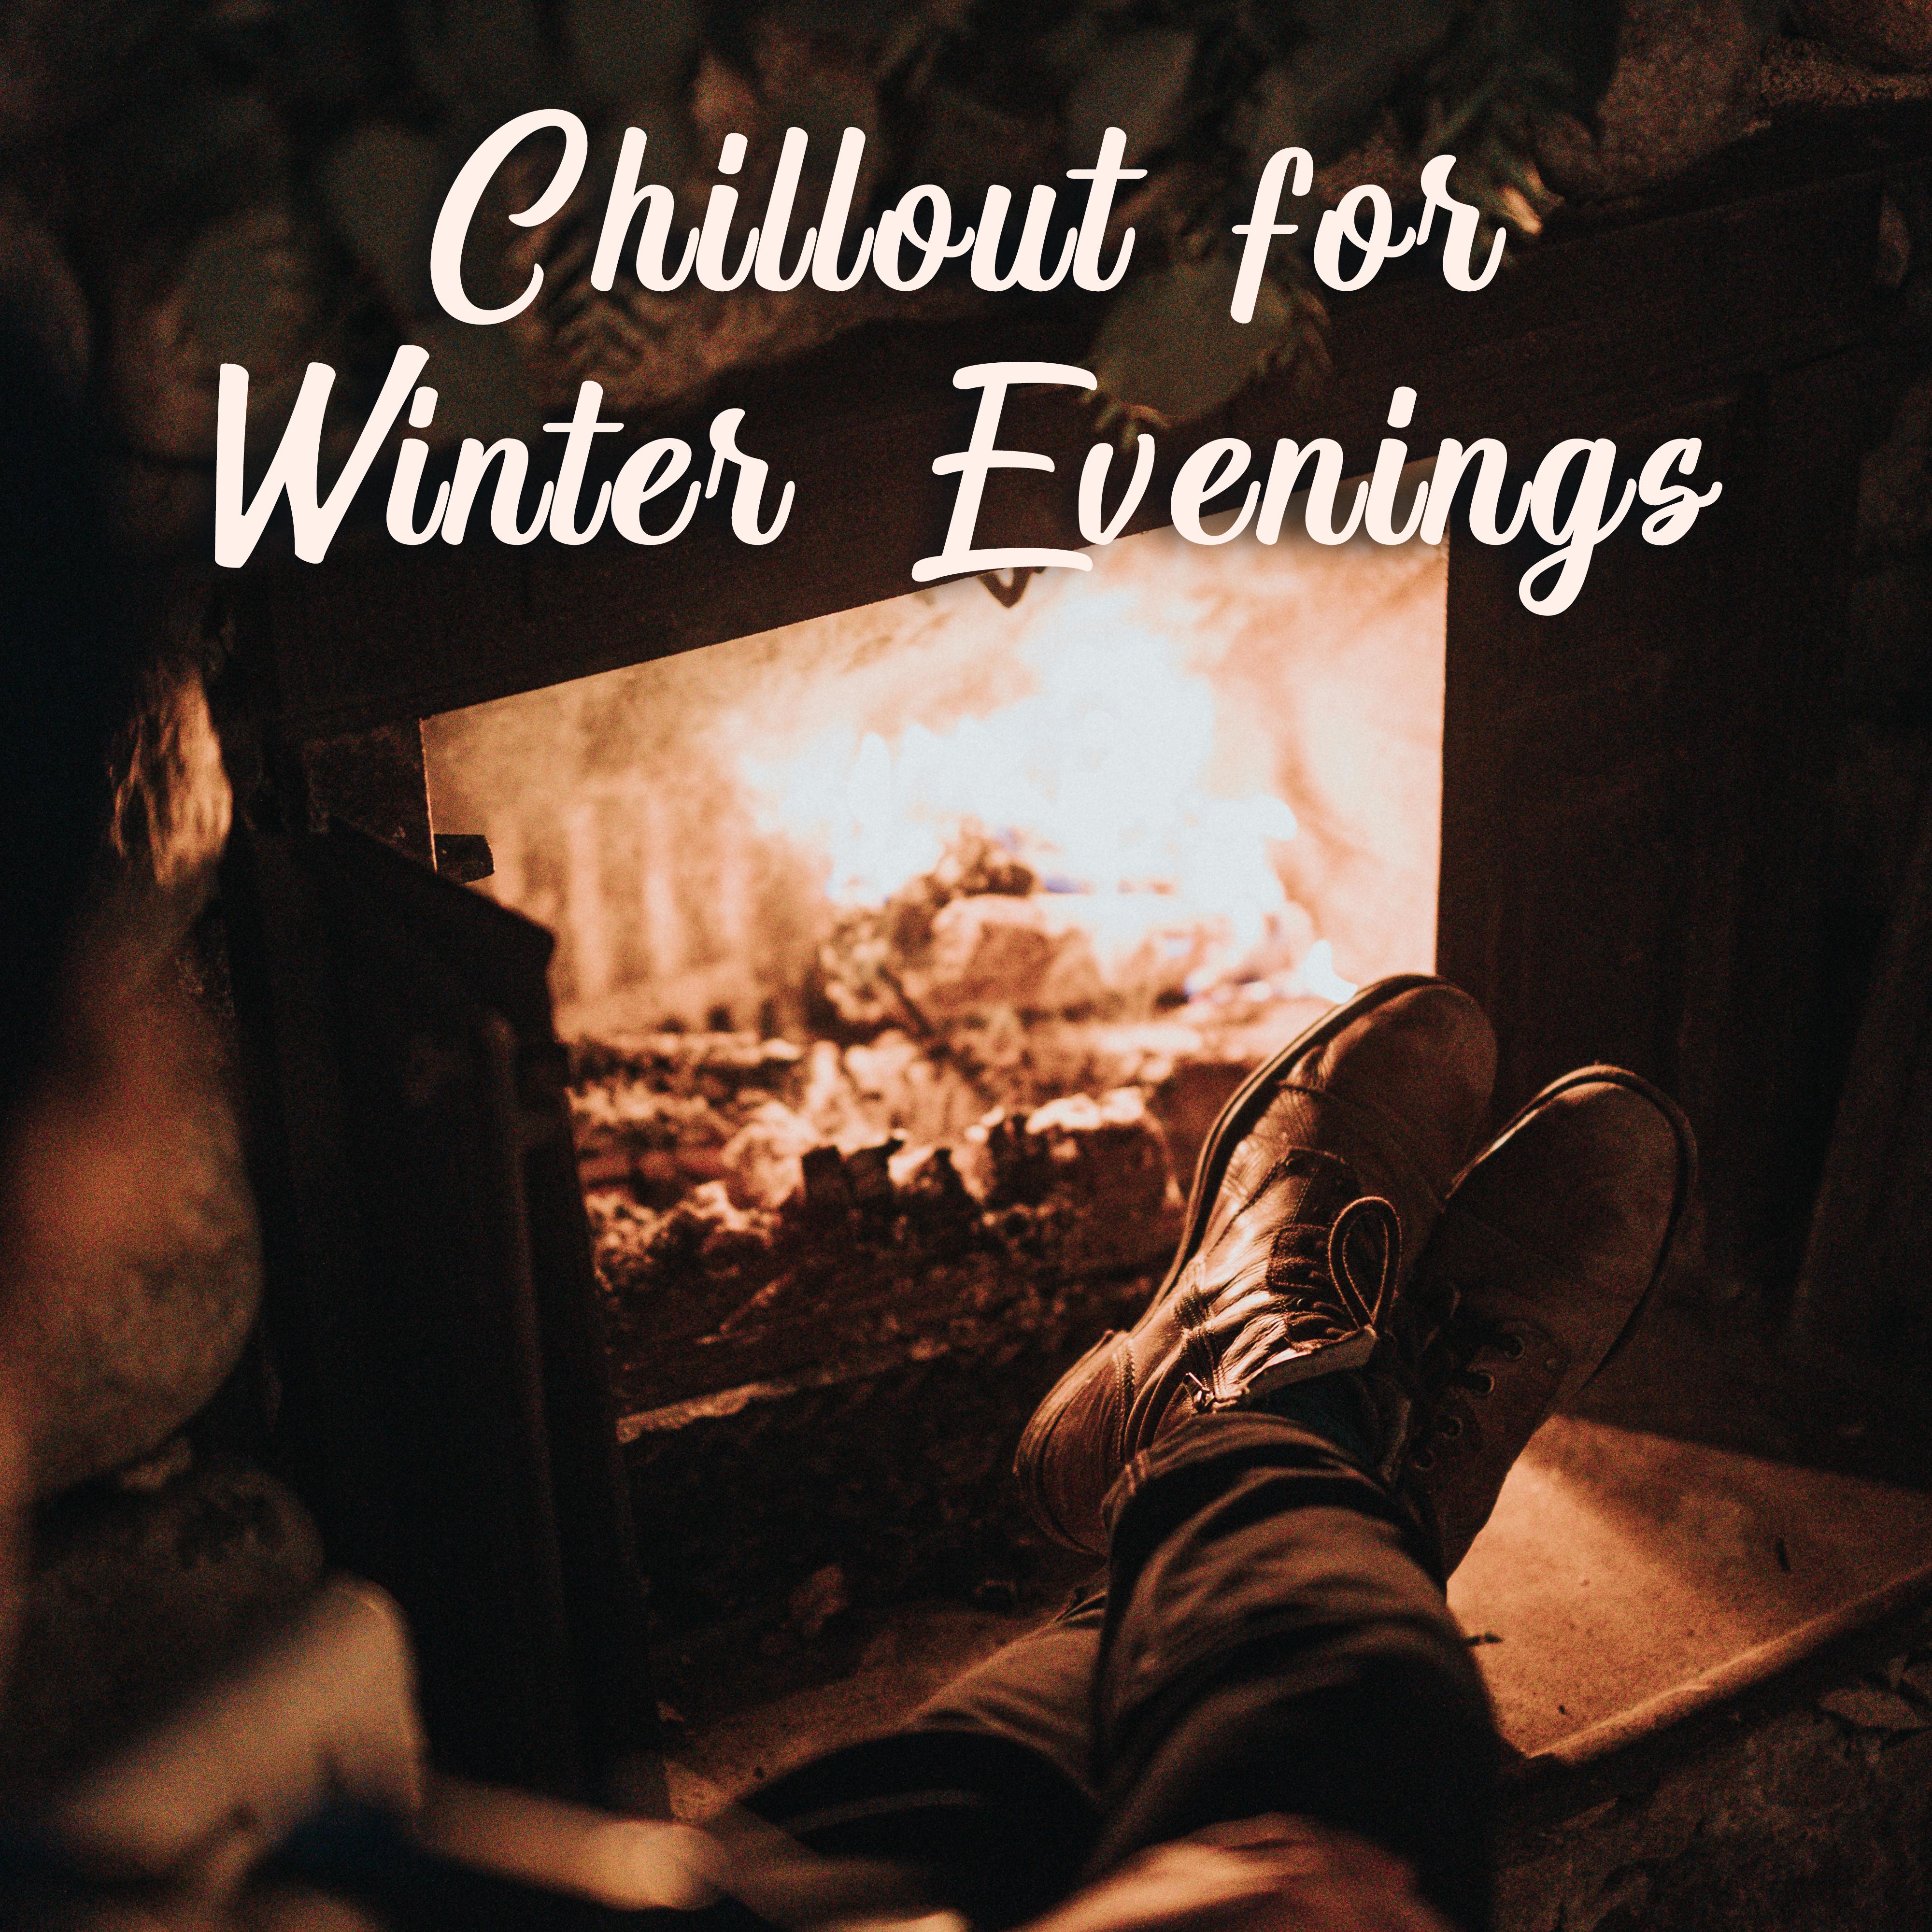 Chillout for Winter Evenings: Calm, Deep and Warming Tones for Cool Evenings